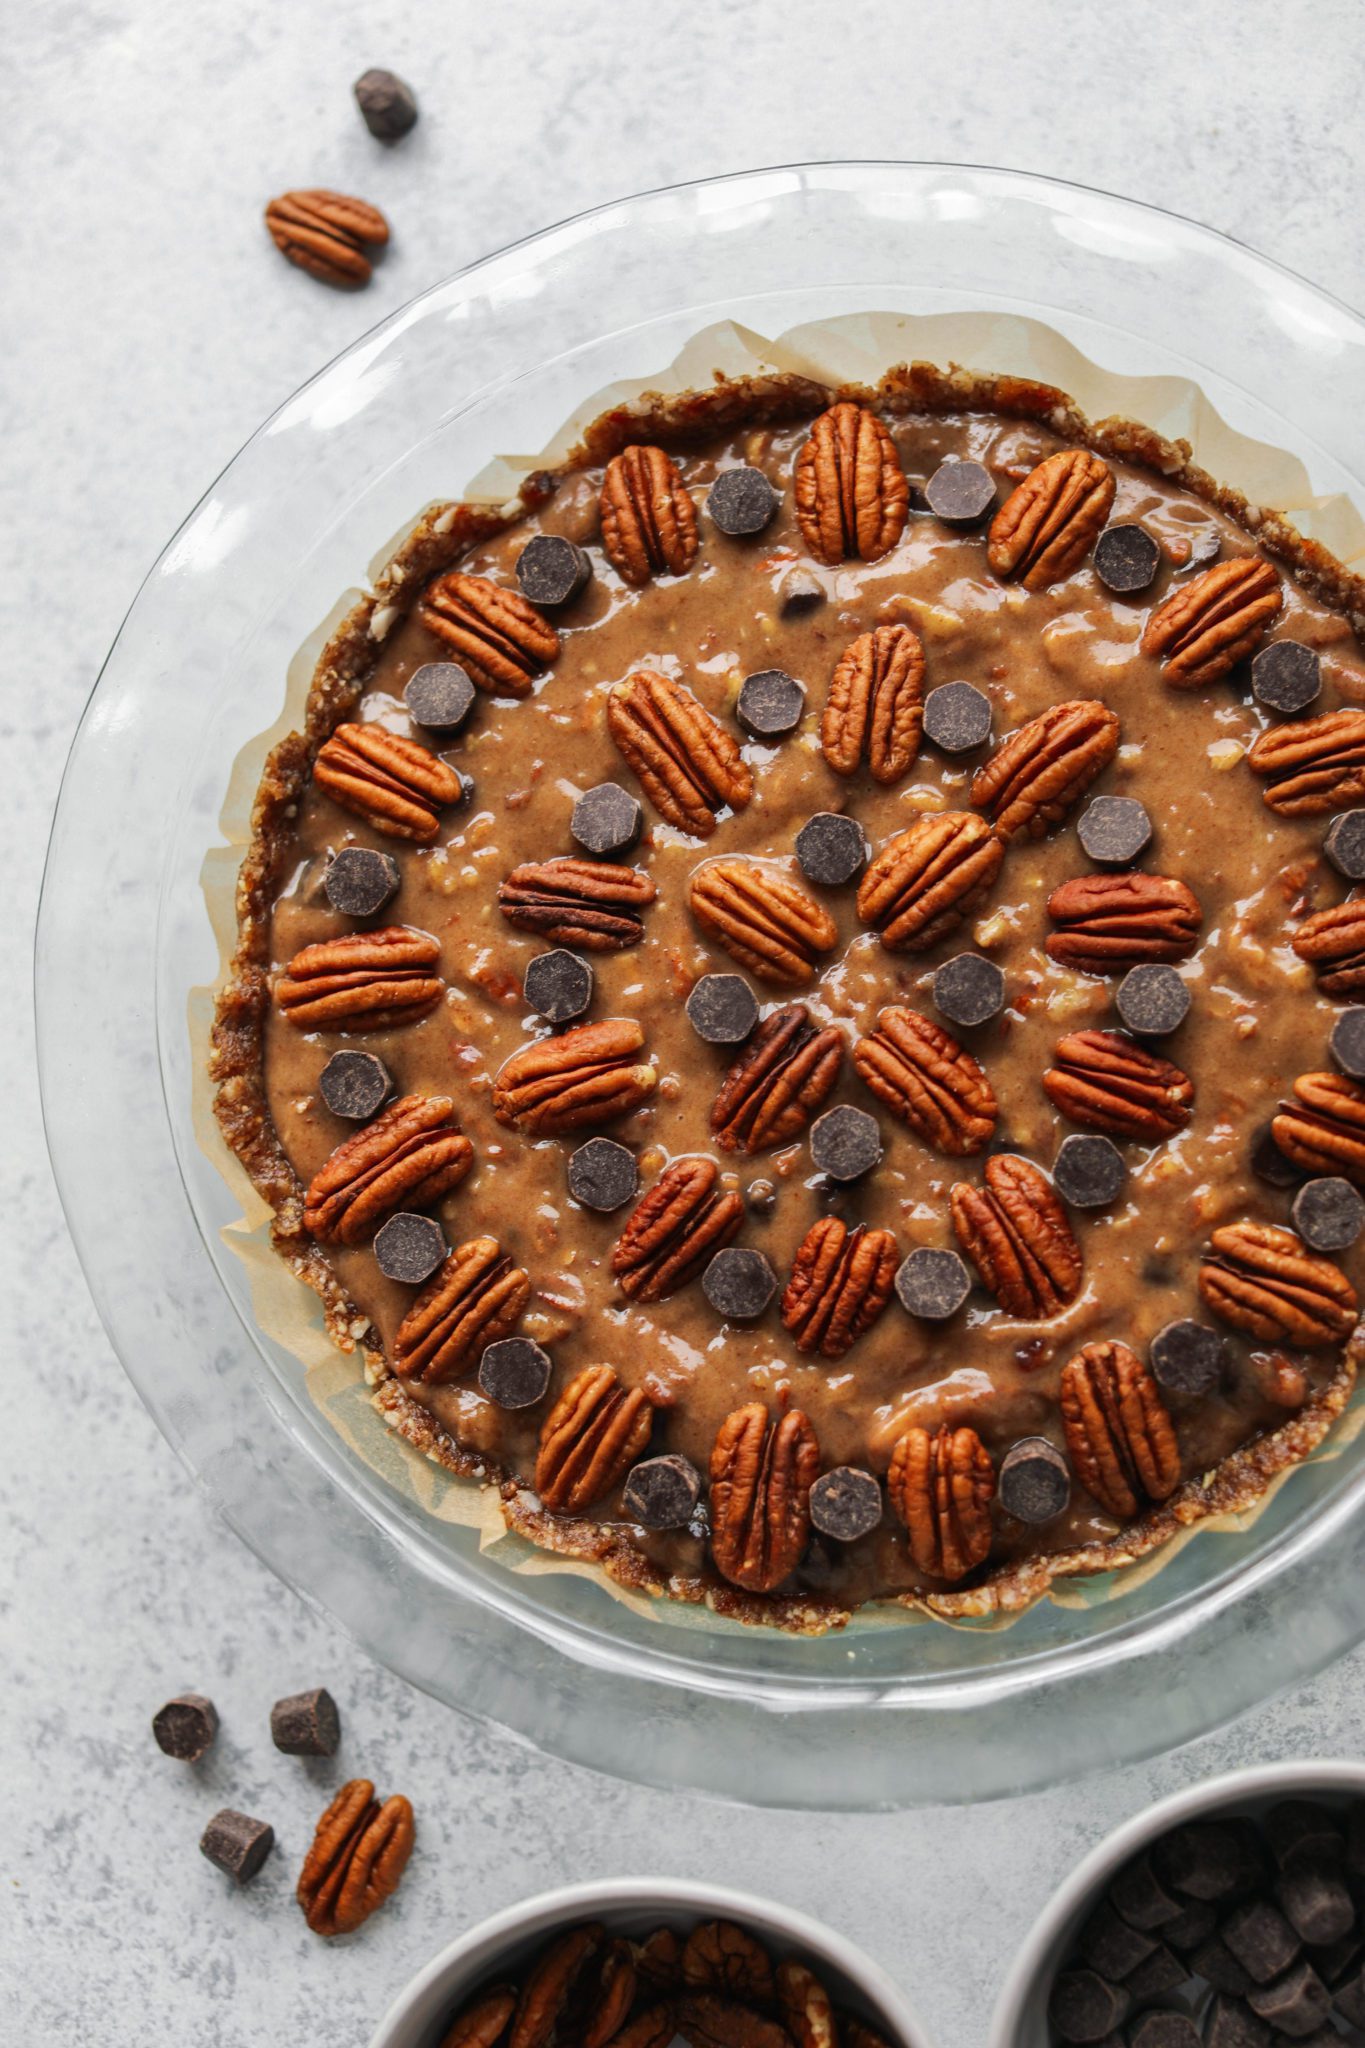 Pecan Pie filling topped with dark chocolate chips and pecans in pie pan by Flora & vino